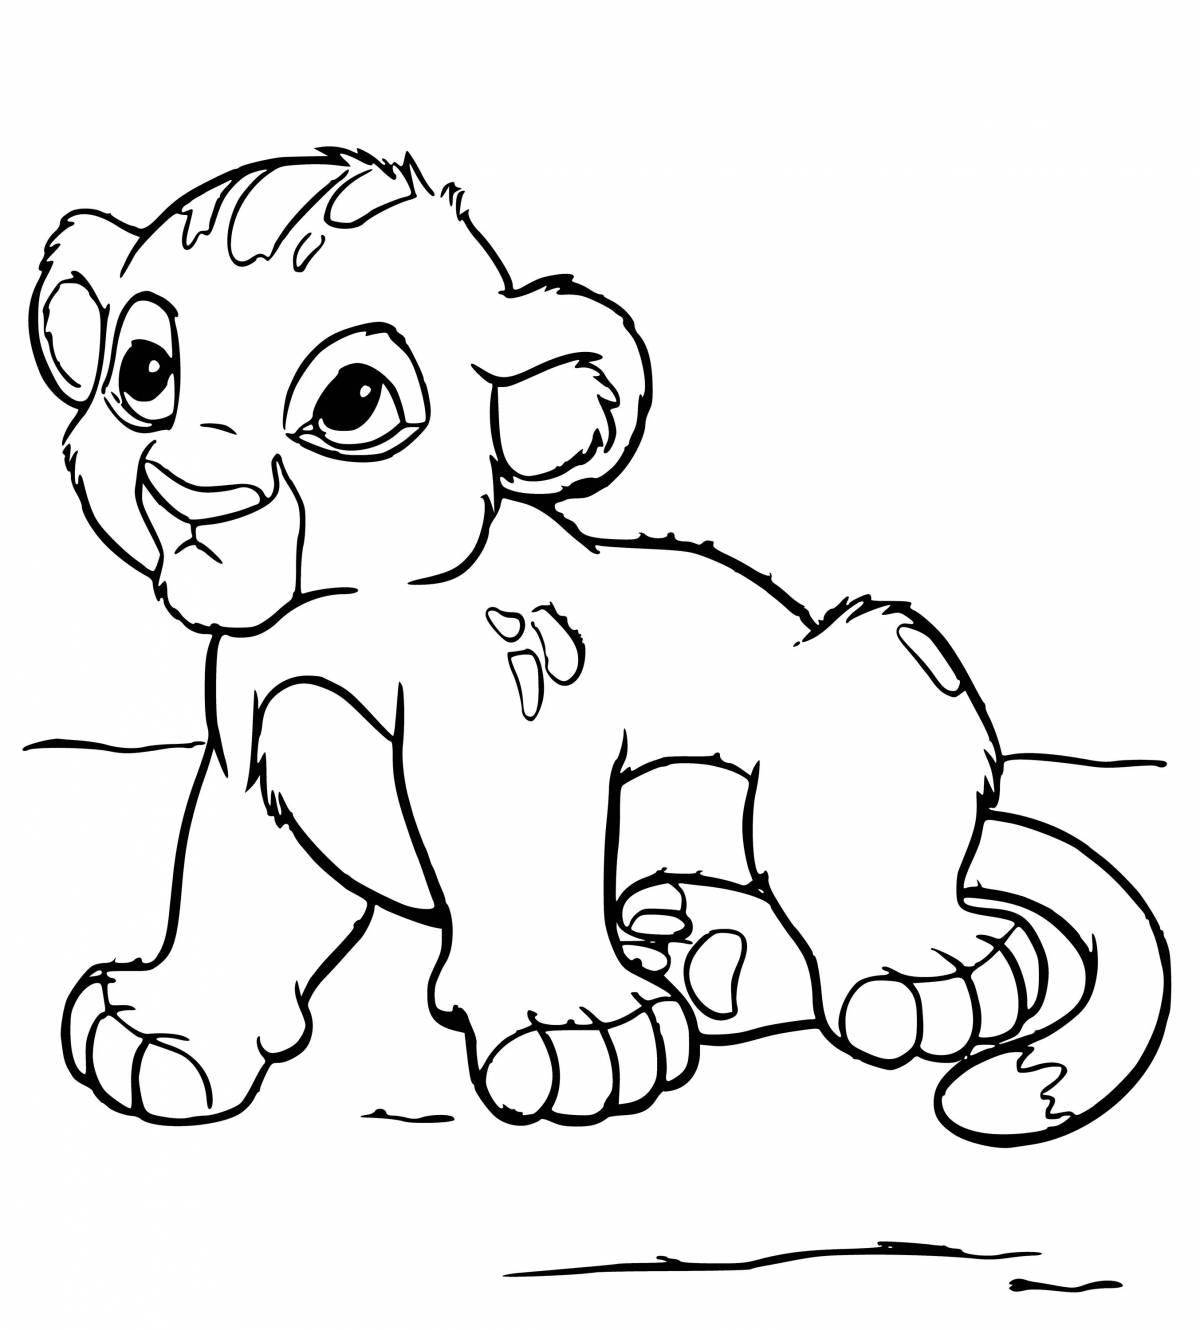 Crazy Simba coloring for kids